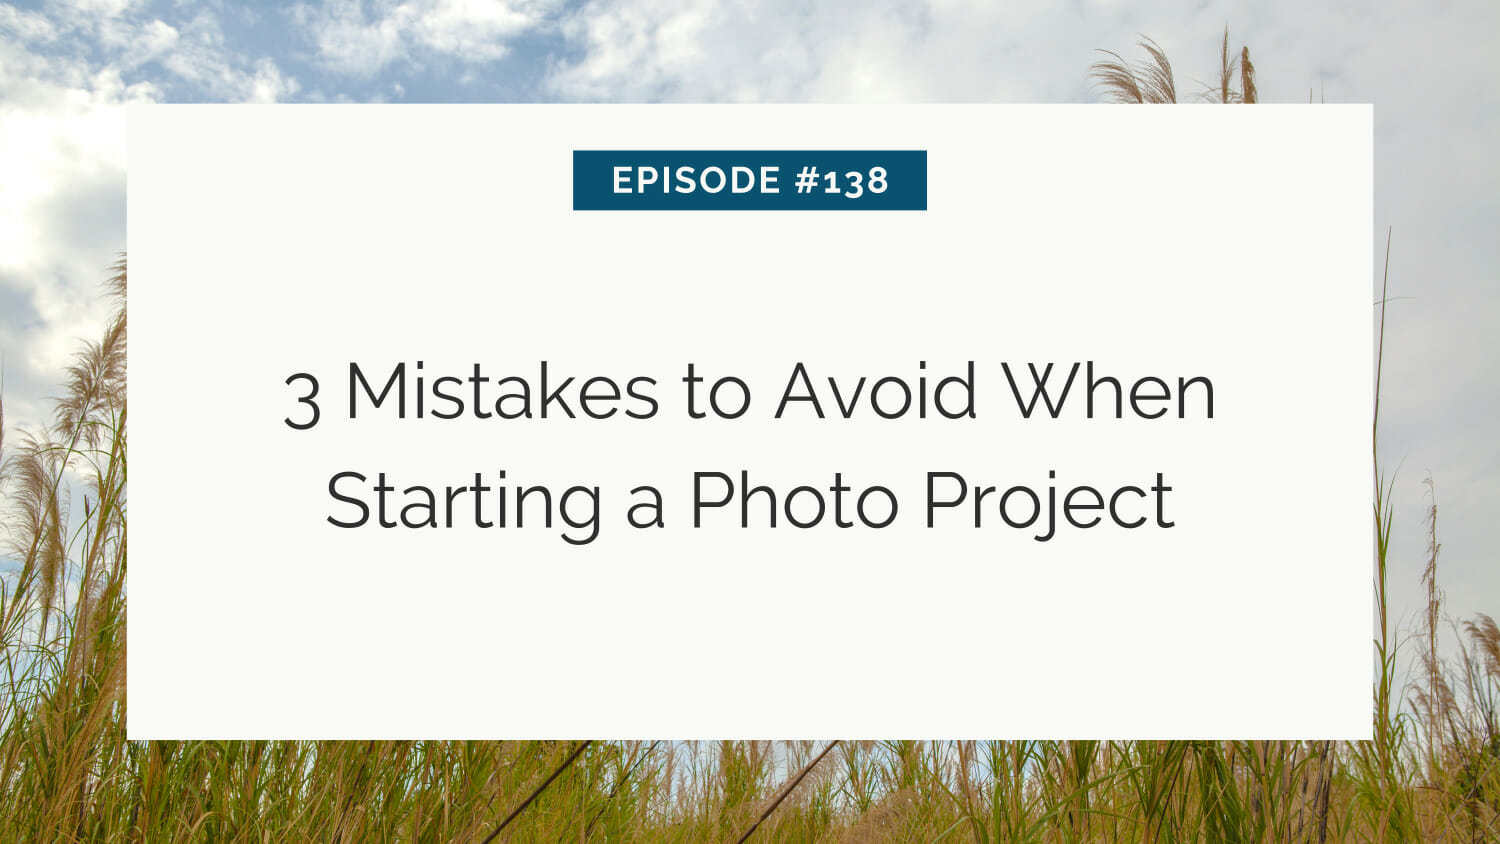 Title slide for a tutorial or podcast episode on photography, detailing three common errors to avoid when beginning a photography project.